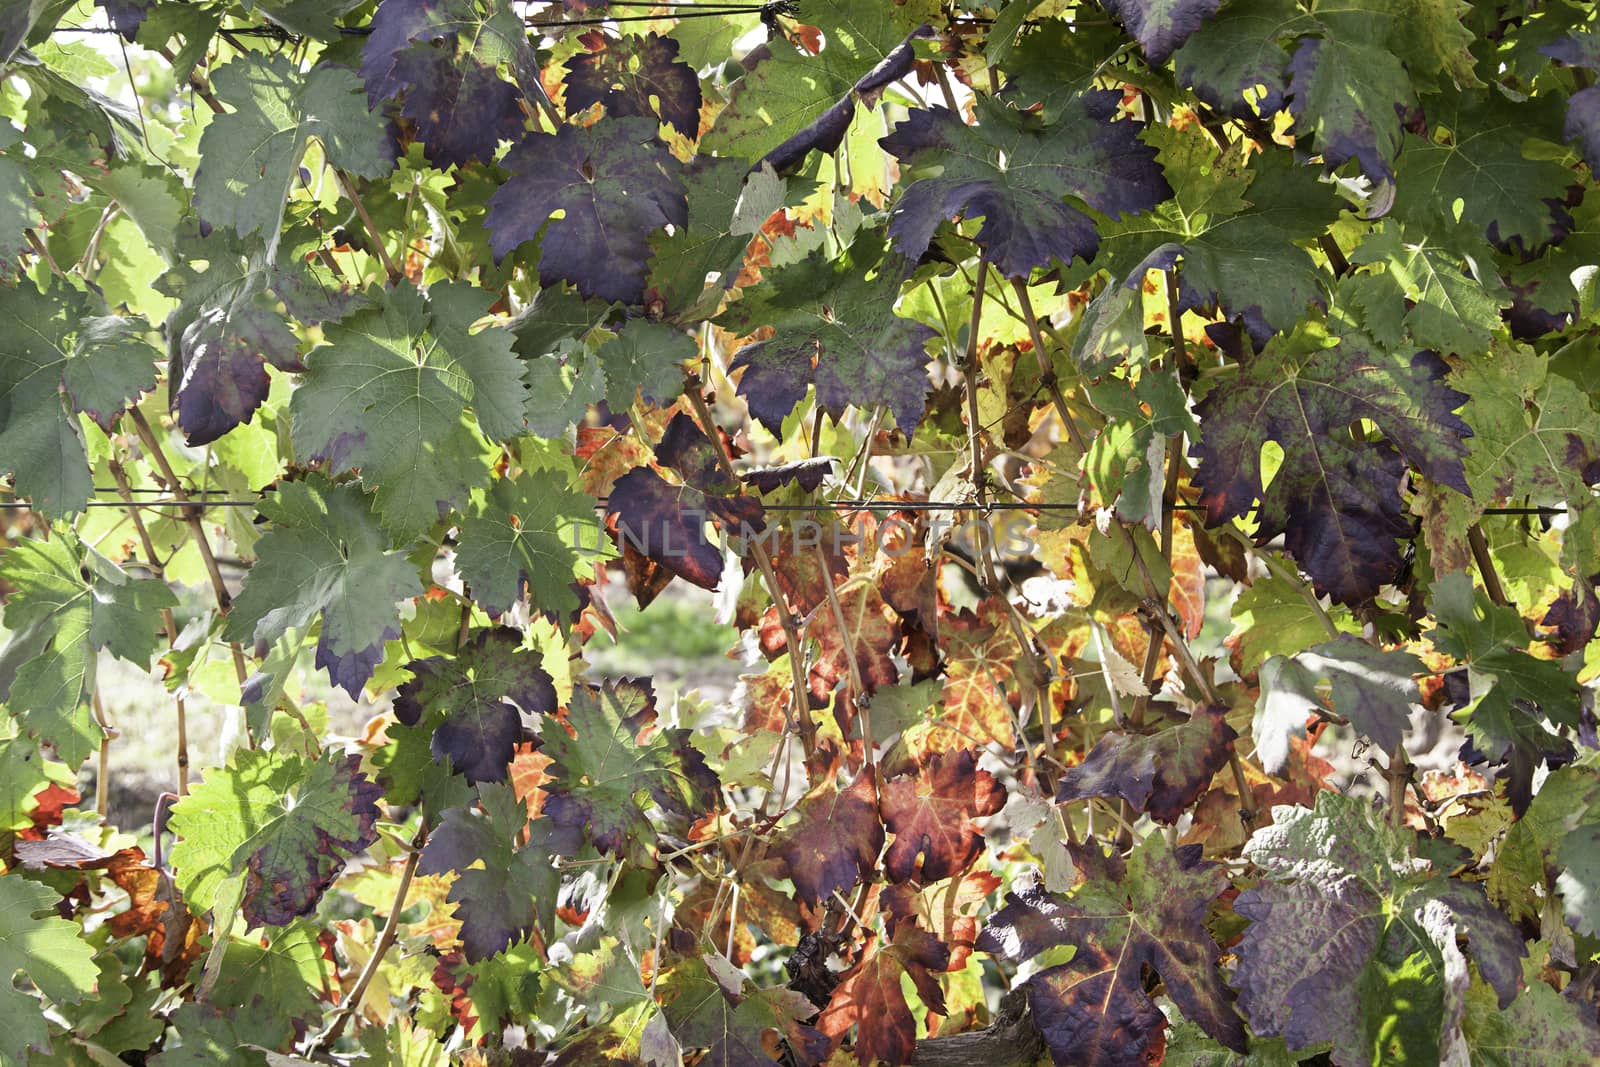 Vines in the field, detail of a growing vines, fruit and grapes